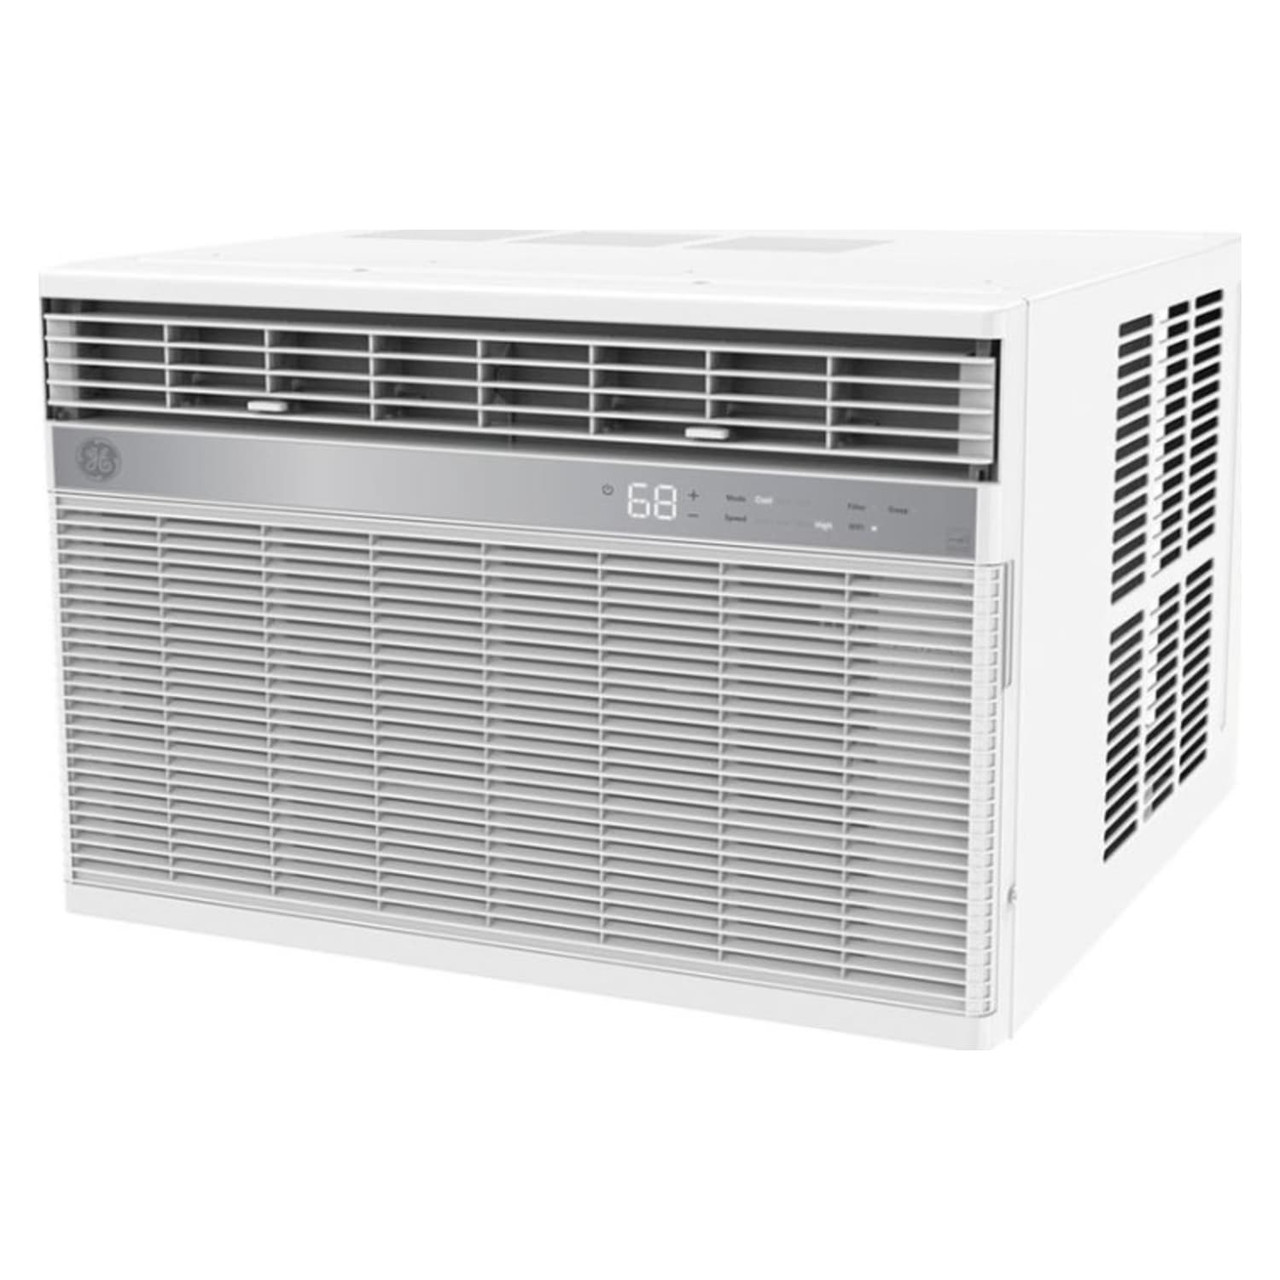 GE® 18,300 BTU 230/208 Volt Smart Electronic Window Air Conditioner for Extra-Large Rooms